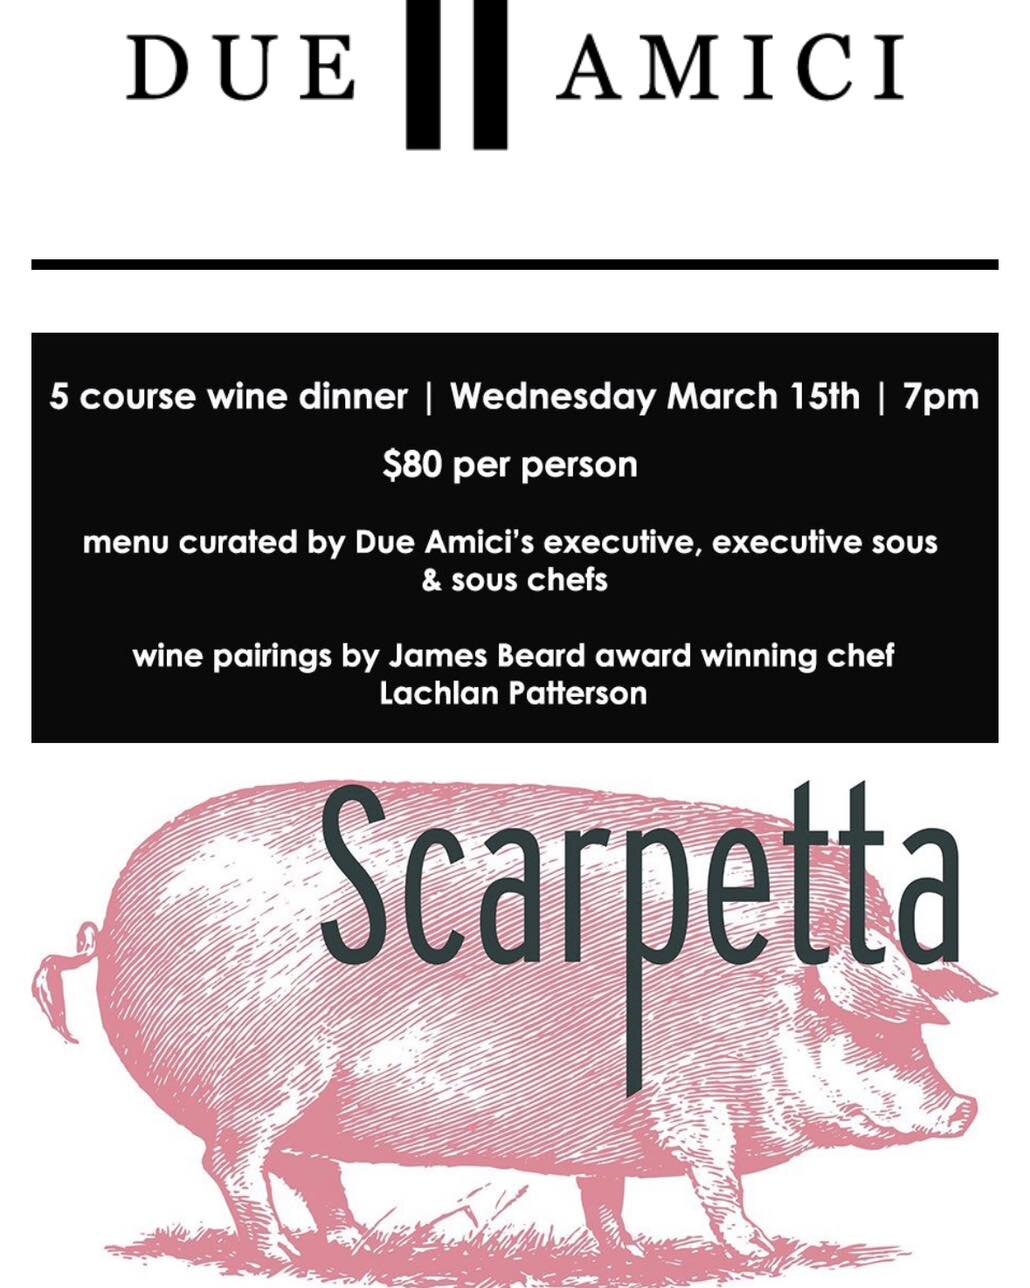 Join us for a special evening for the Scarpetta Wine Dinner on Wednesday, March 15th at 7pm! 5 courses with 5 wine pairings, $80 per person.

Today is the last chance to RSVP. Visit due-amici.com to purchase your tickets. 

&bull;
&bull;
&bull;
&bull